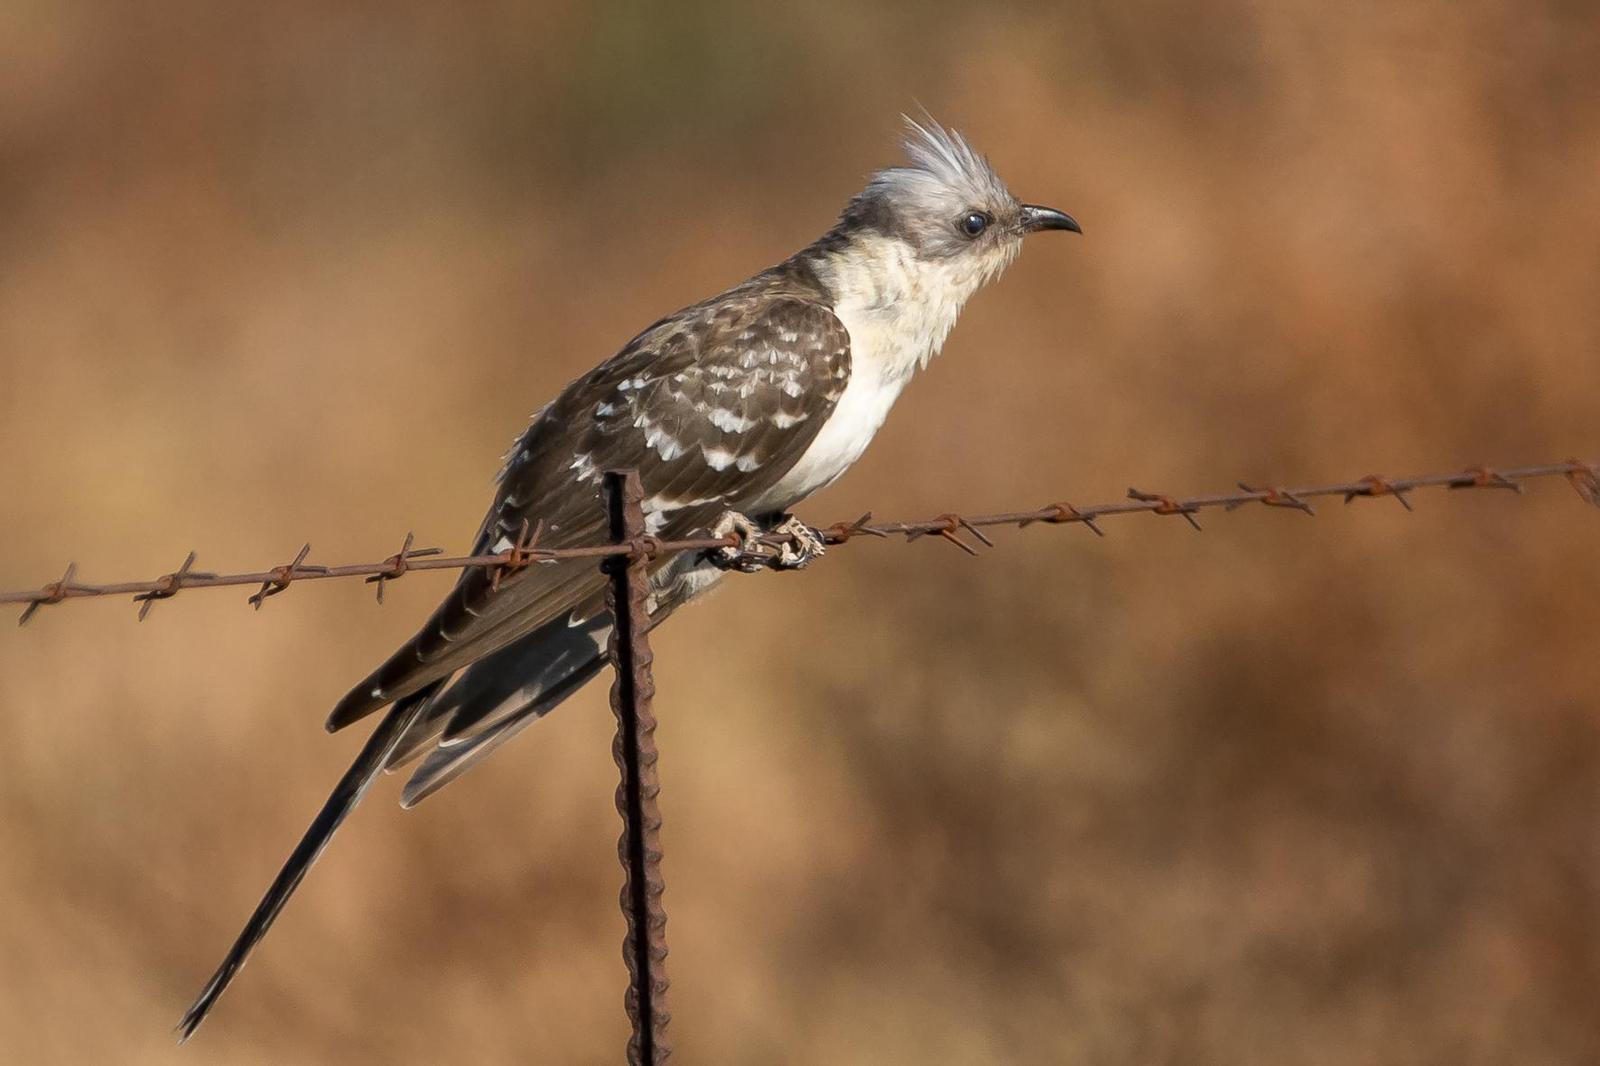 Great Spotted Cuckoo Photo by Gerald Hoekstra